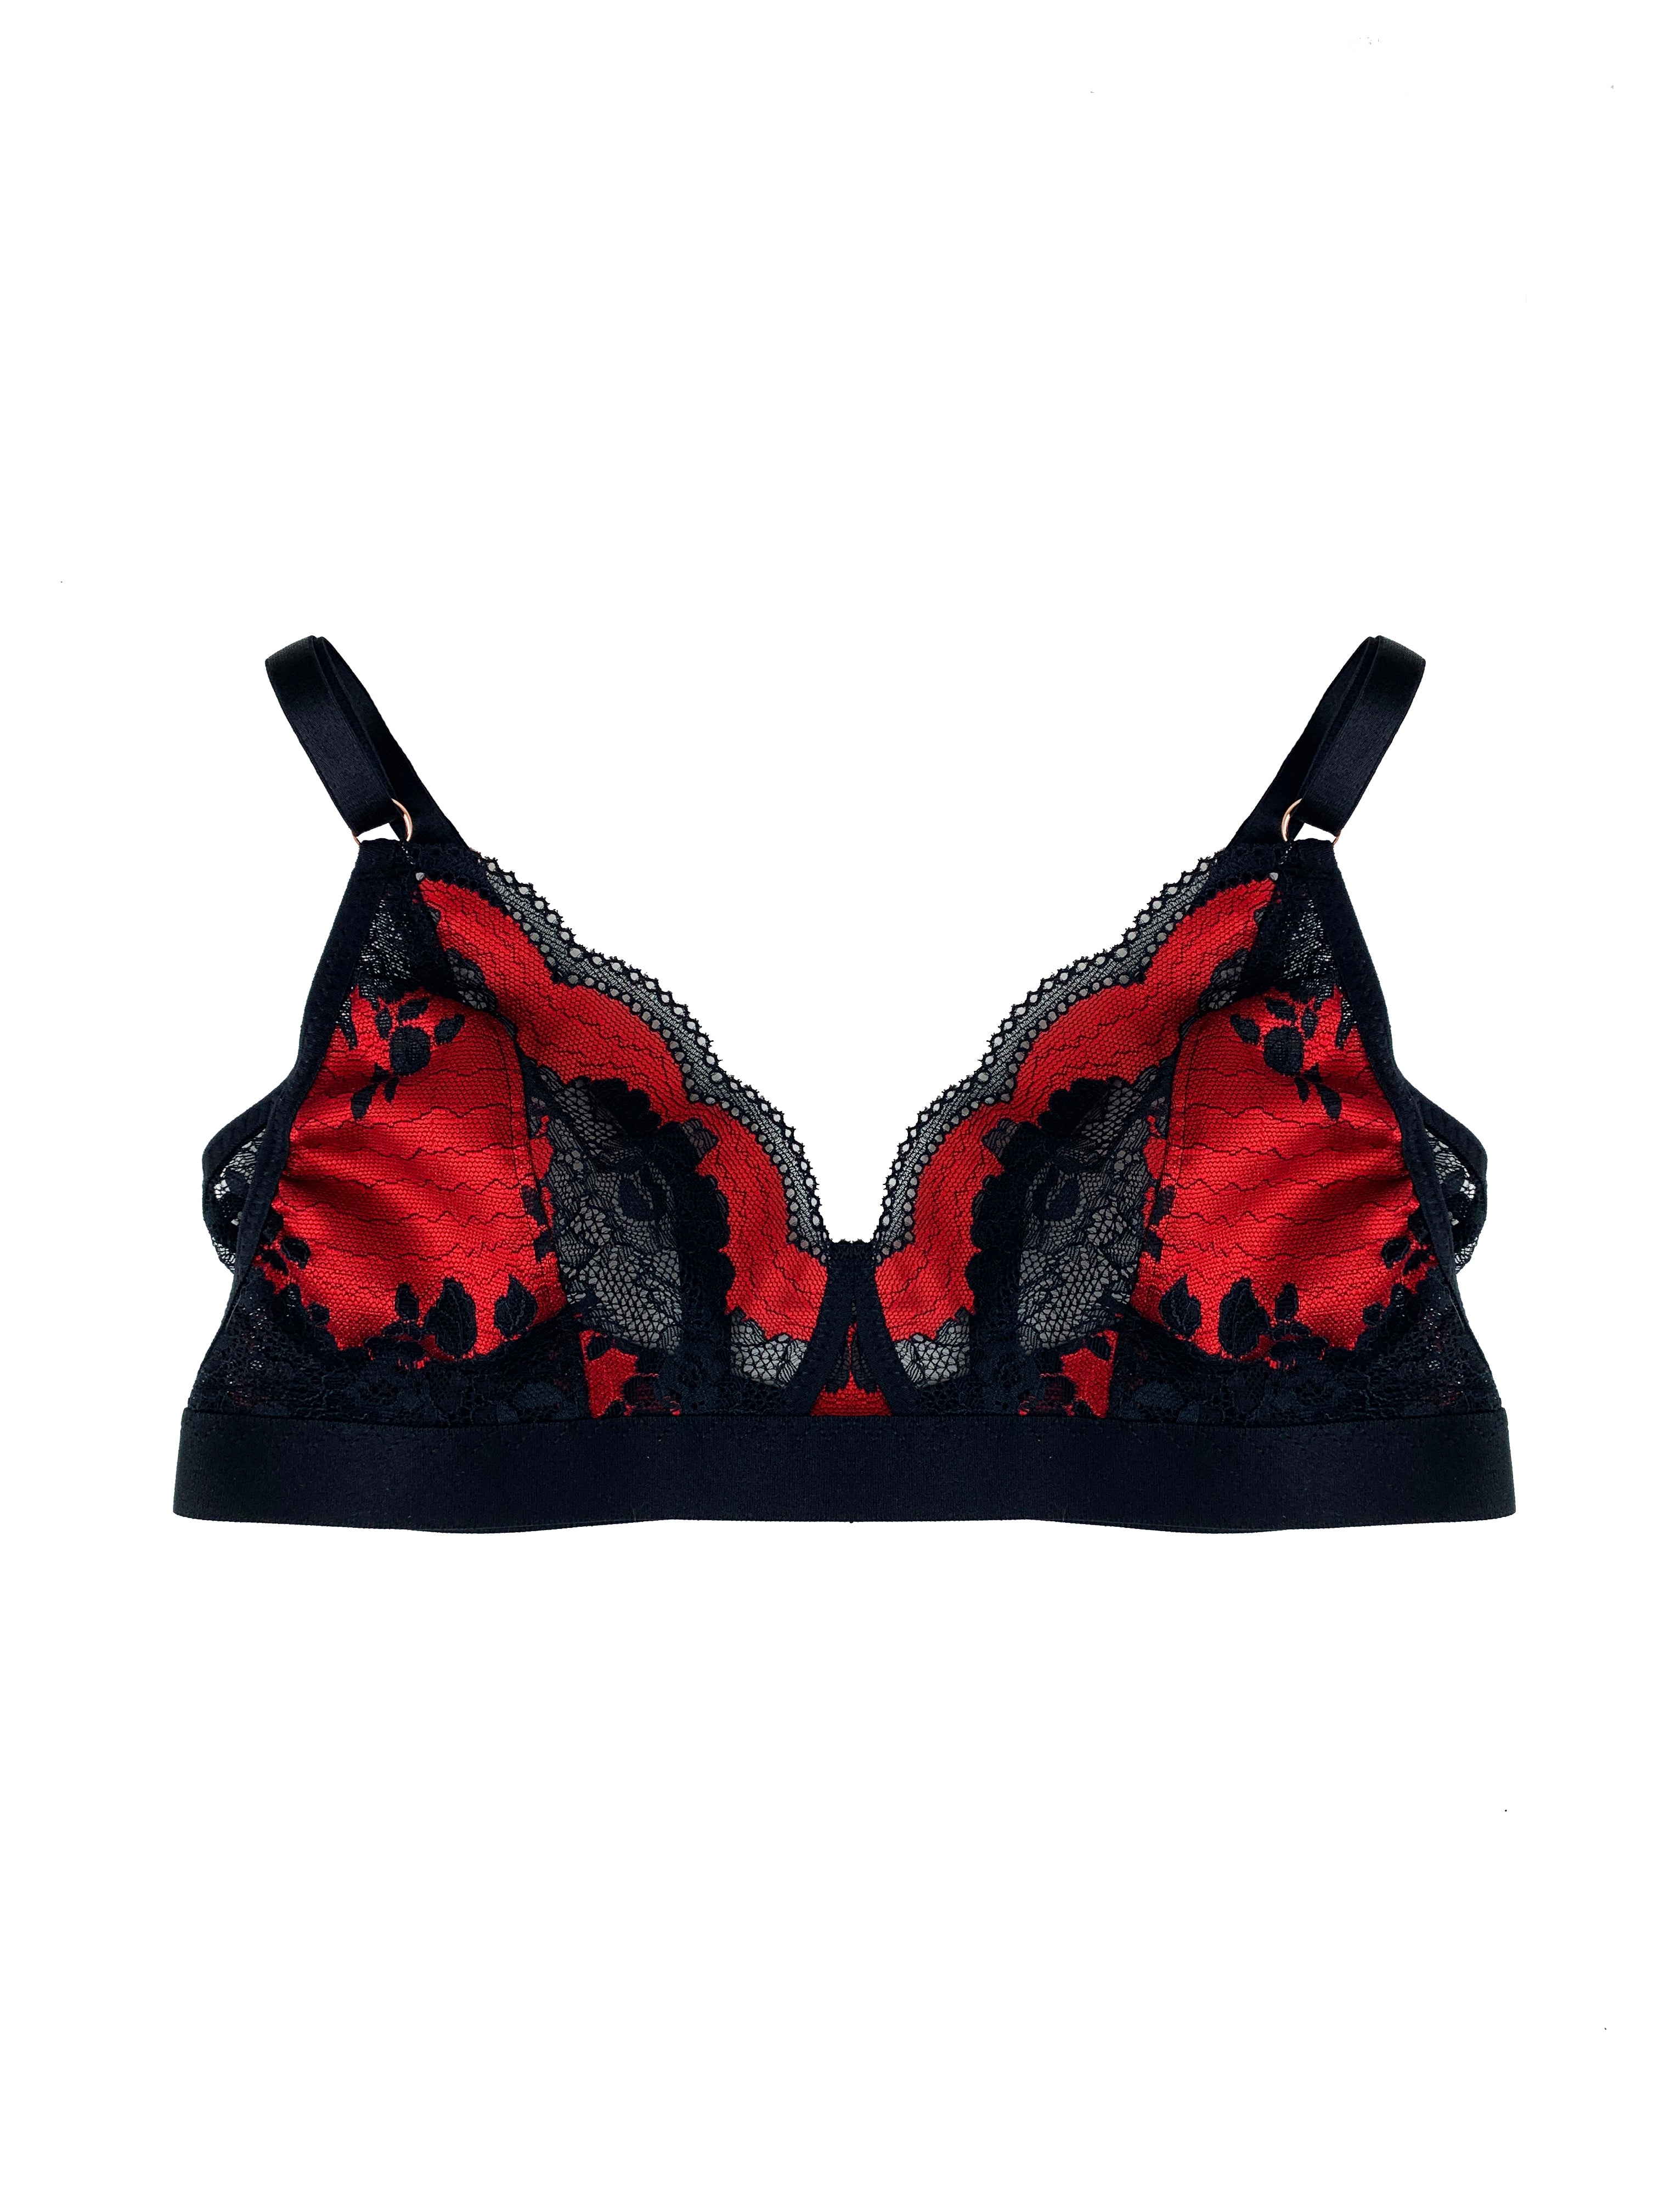 france black nude red 3/4 cup 32c 32b 34c 36c lace sexy lingerie